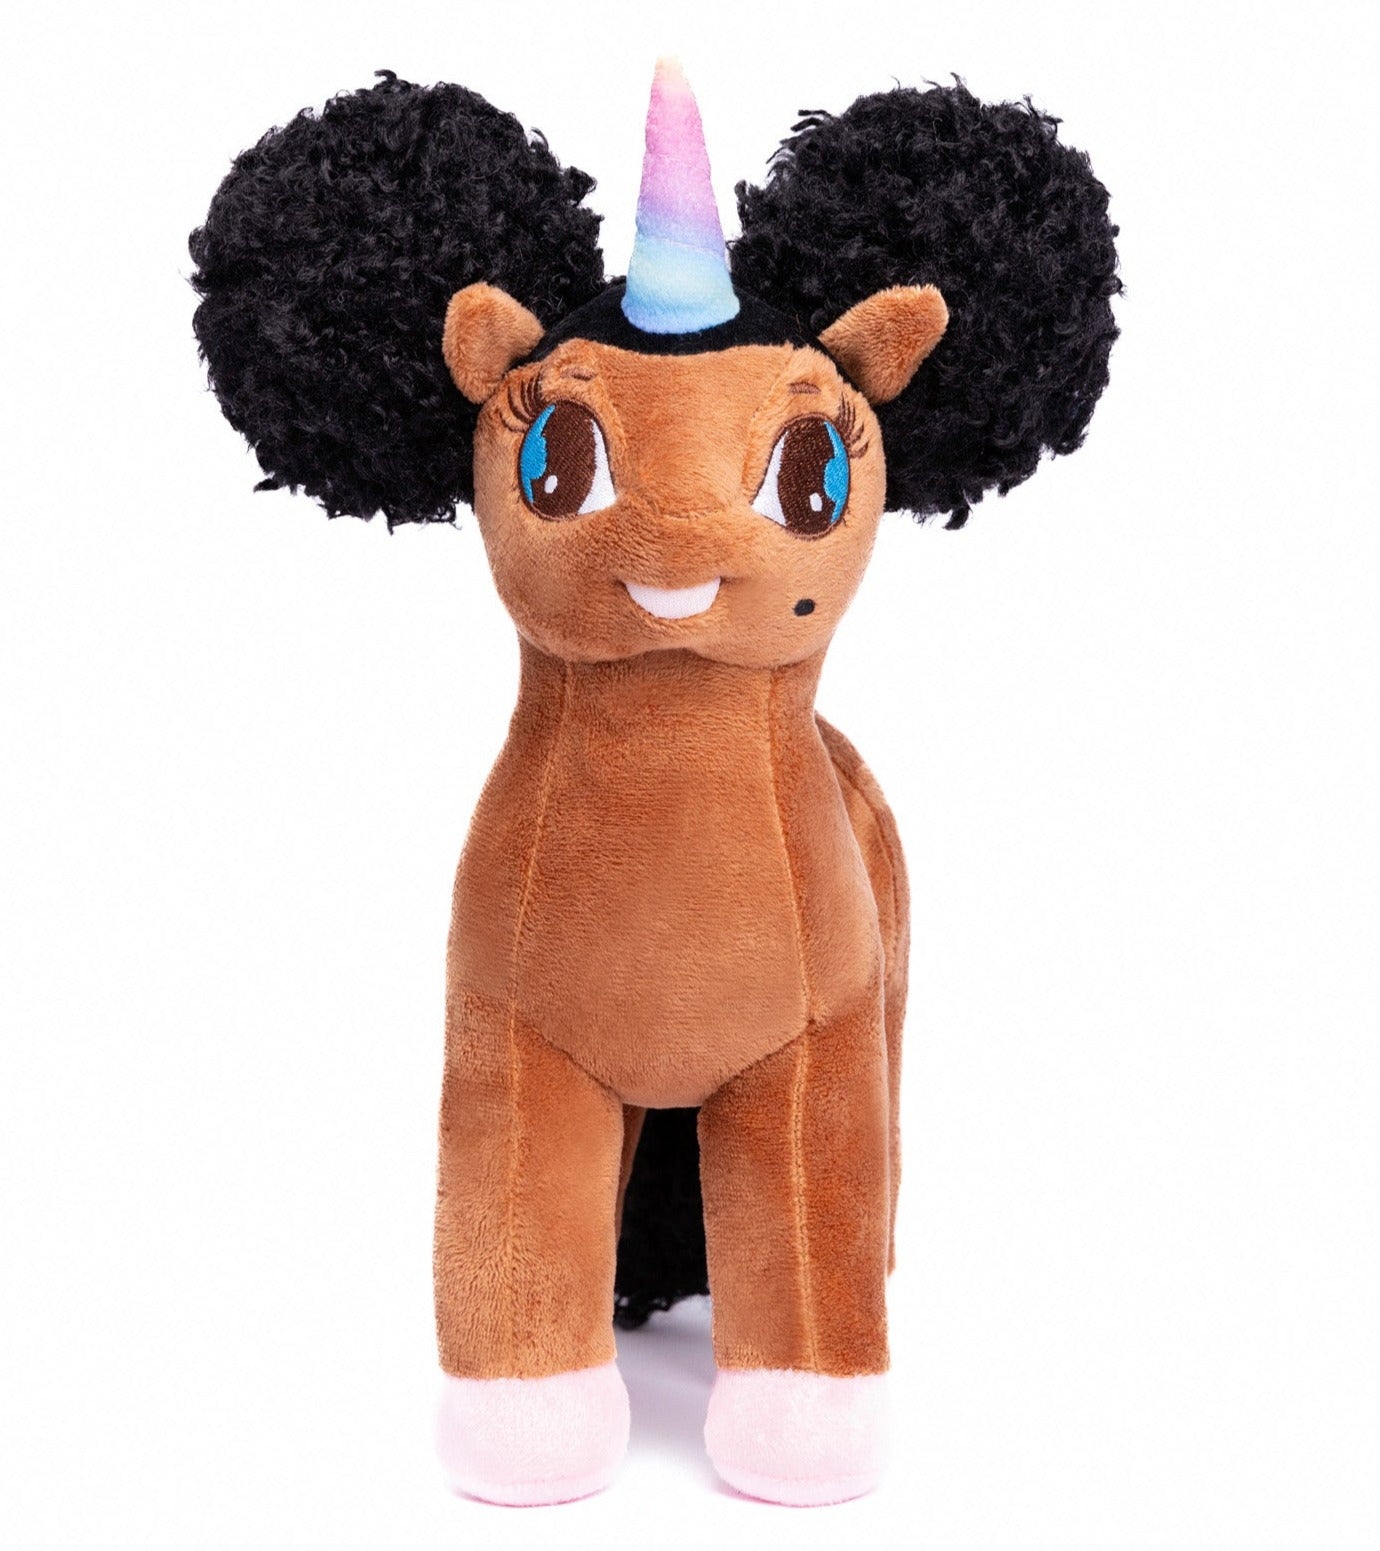 Load image into Gallery viewer, Tiffany, Unicorn Plush Toy with Afro Puffs - 12 inch
